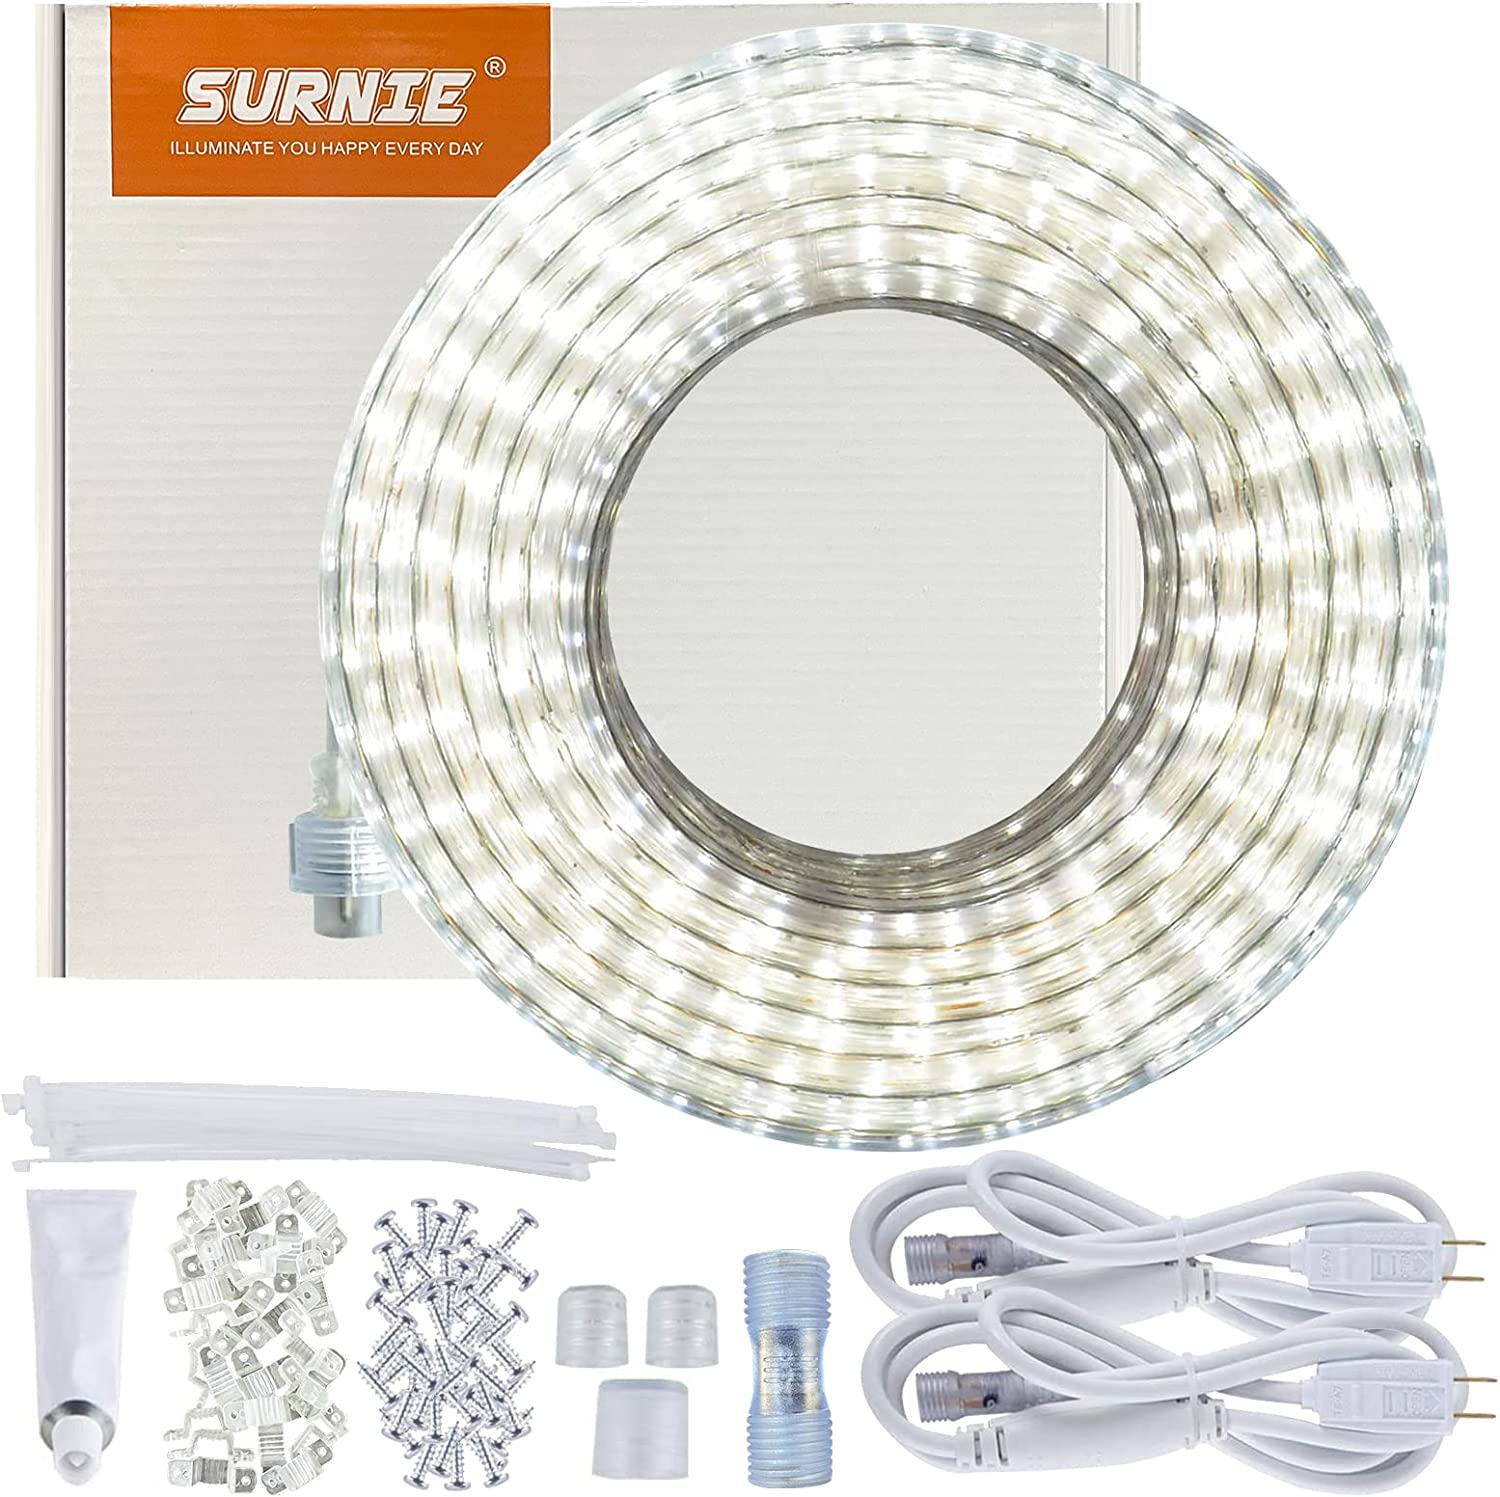 SURNIE Extendable Outdoor Rope Light, 50-Foot